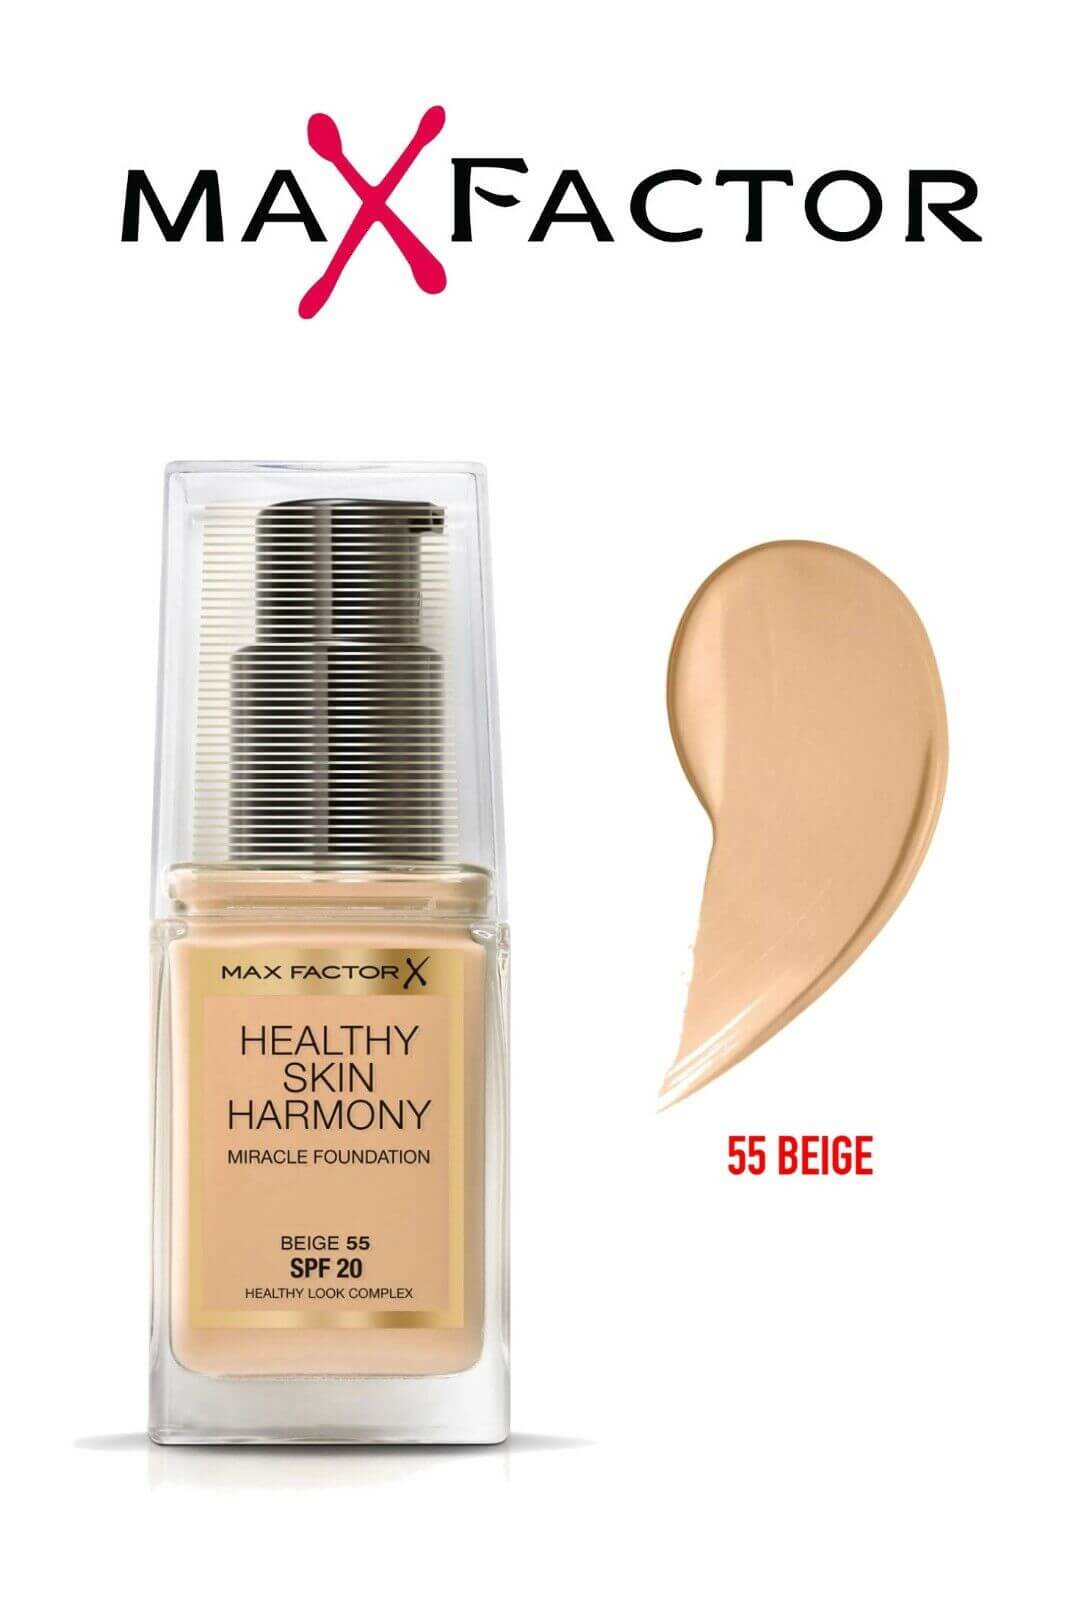 Maxfactor Healthy Mix Harmony Miracle Foundation 55 Beige